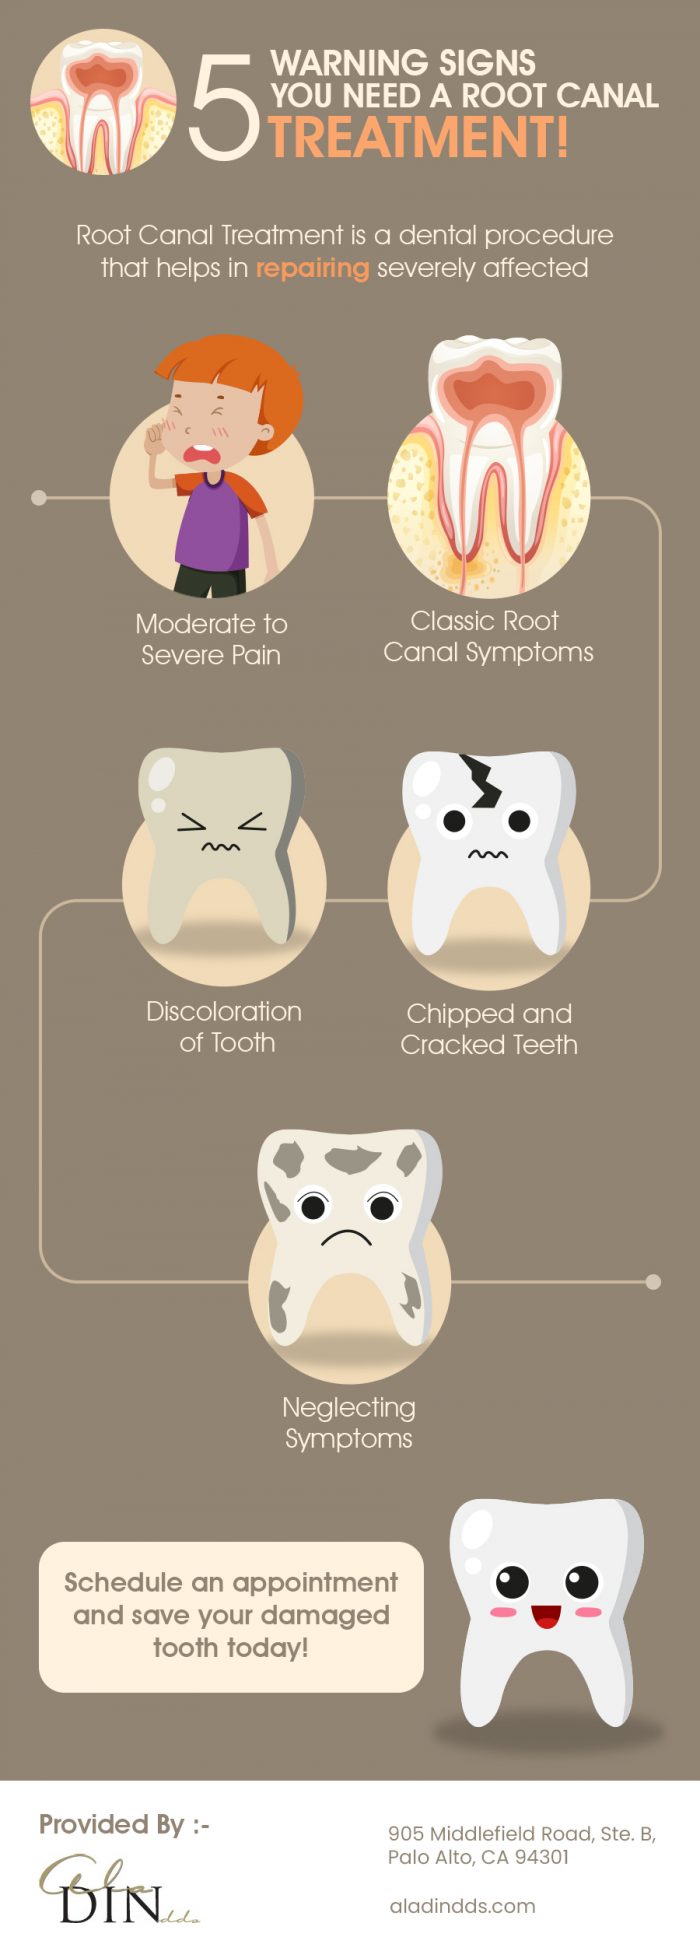 Save your Tooth With Root Canal Treatment in Palo Alto from Ala Din DDS